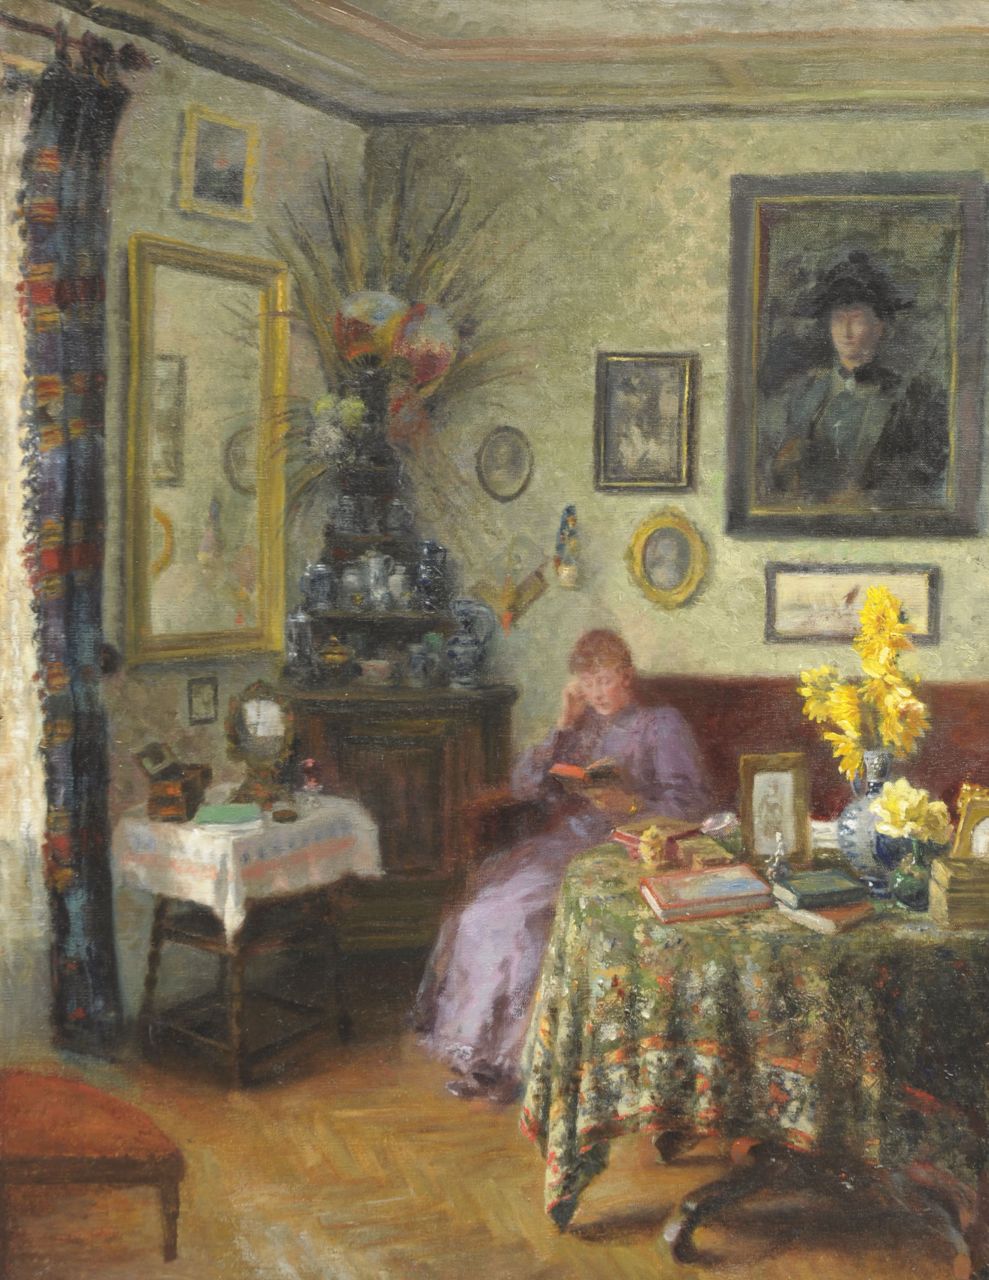 Hollandse School, begin 20e eeuw   | Hollandse School, begin 20e eeuw | Paintings offered for sale | Interior with woman reading, oil on canvas 85.4 x 66.4 cm